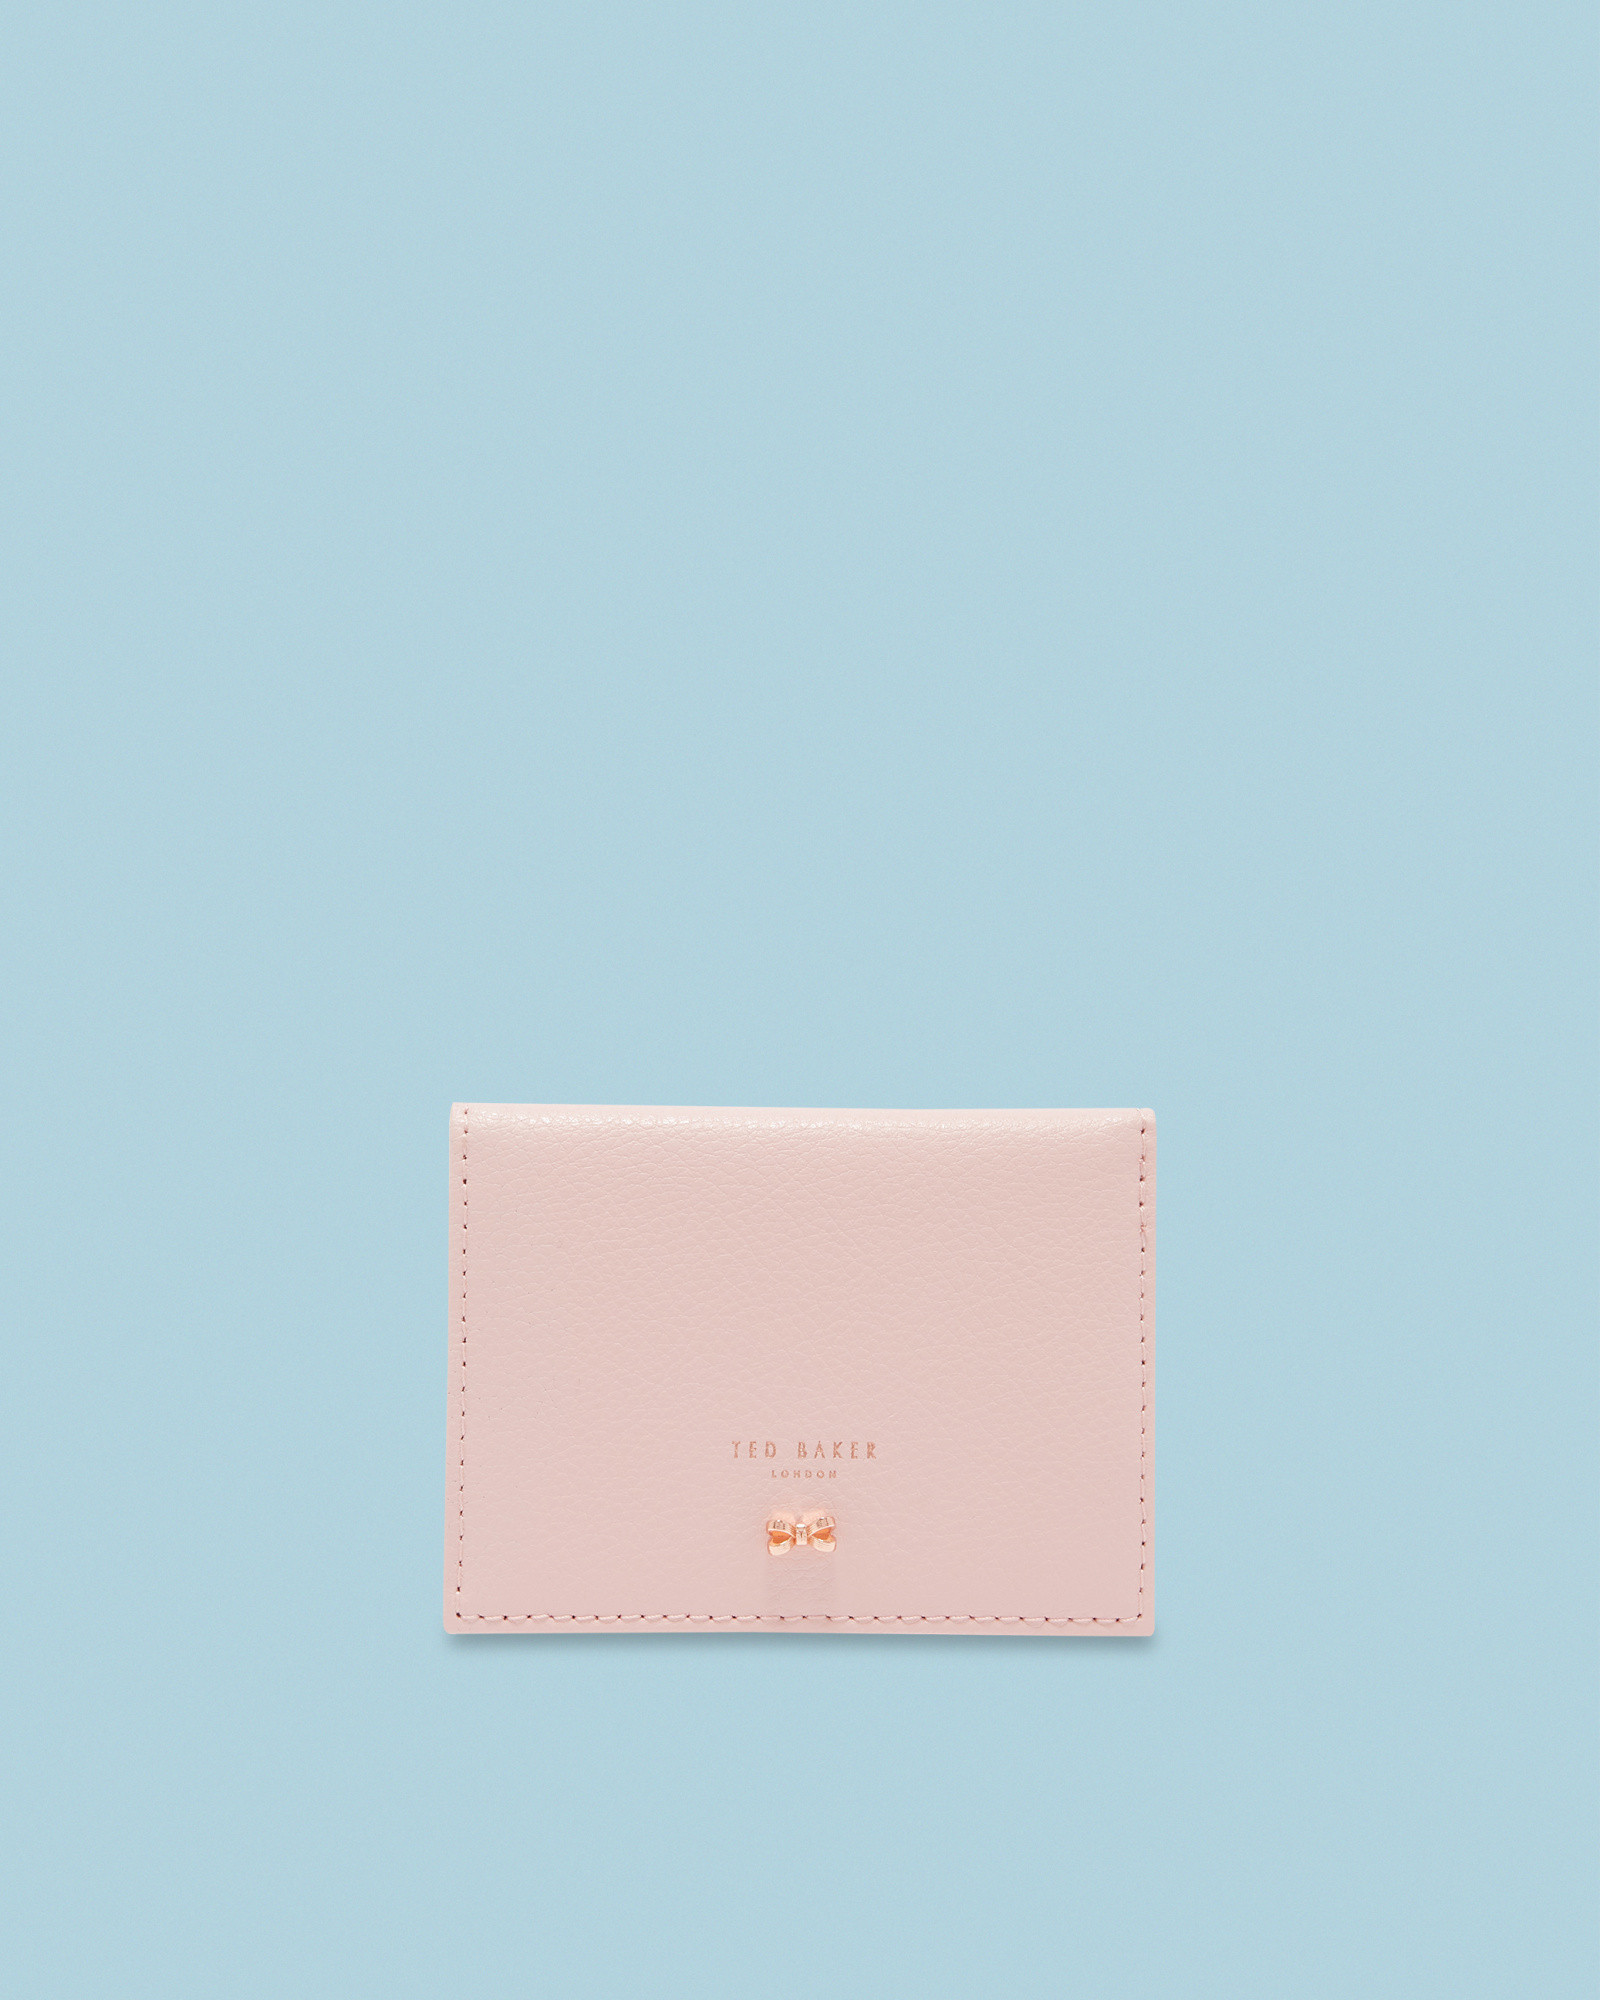 SHIKRA Textured leather card holder